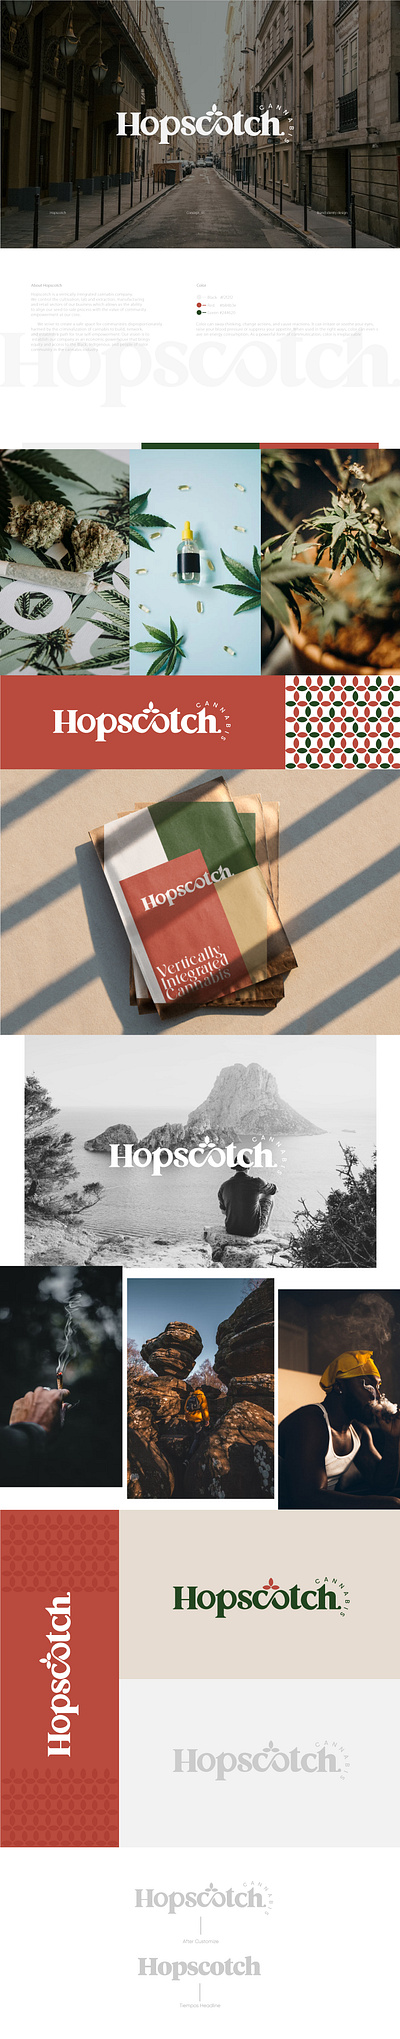 Hopscotch_Logo and Brand identity Design branding clean graphic design logo minimal simple simple clean interface ui